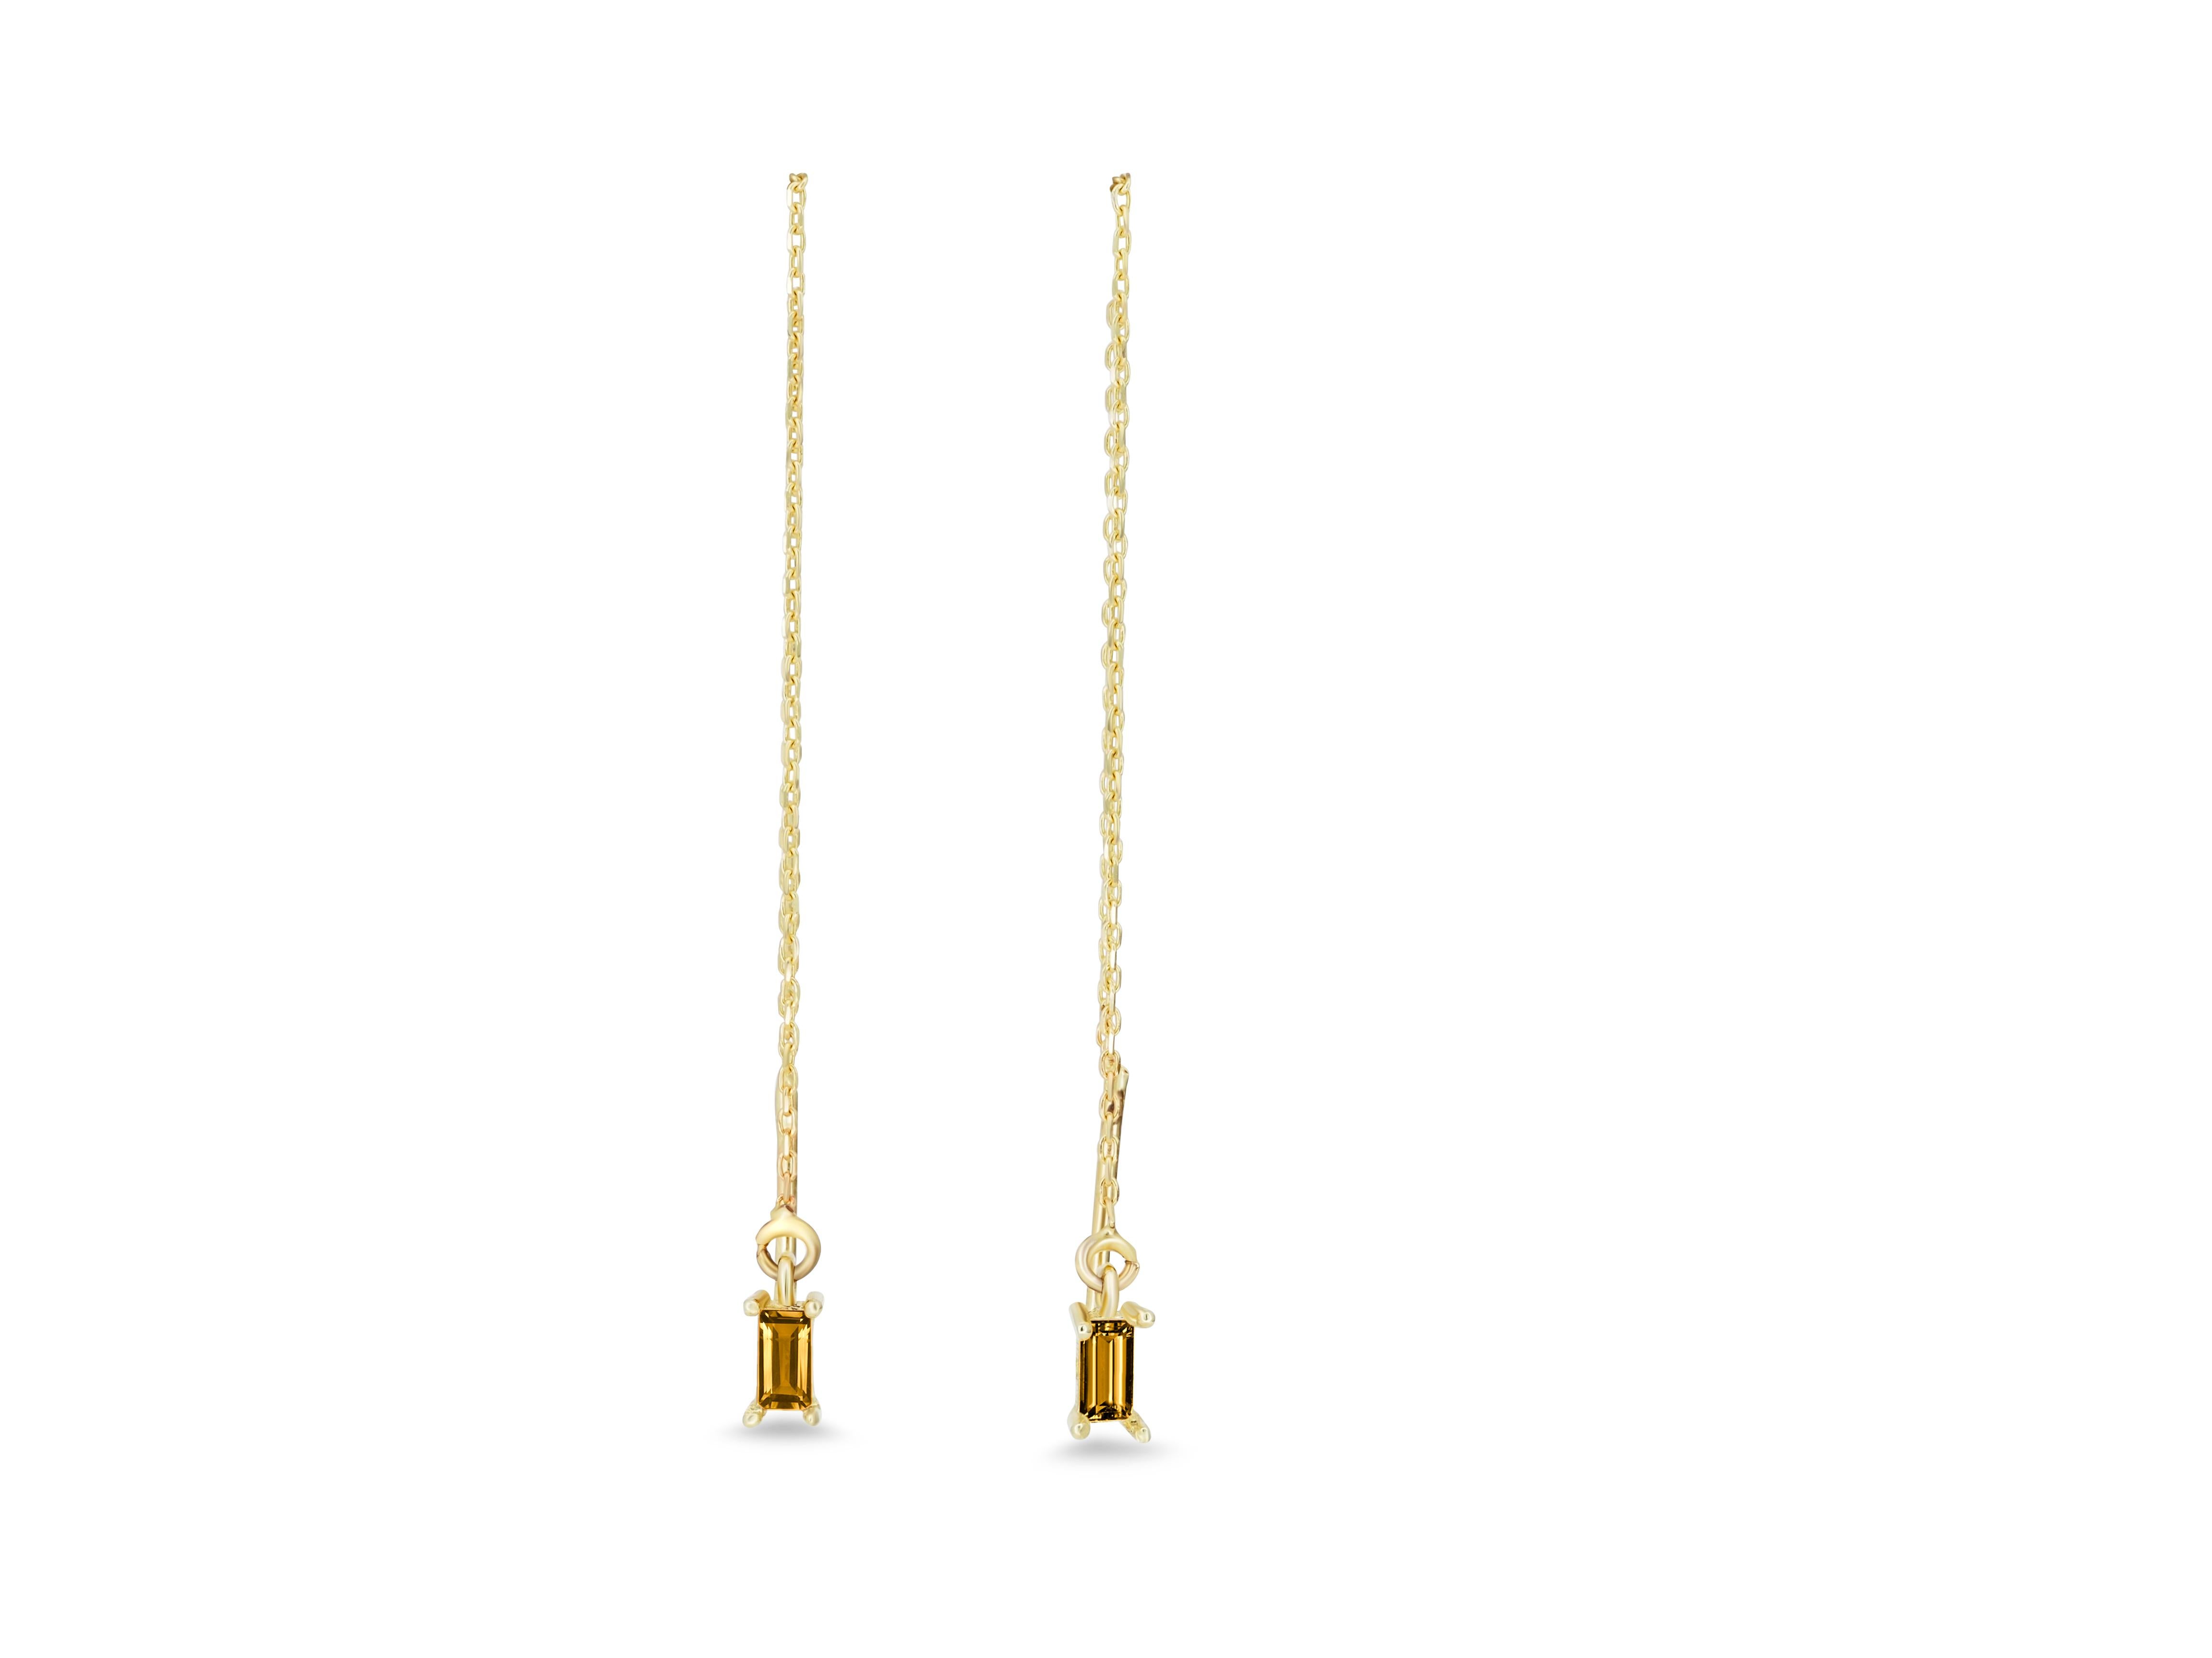 Baguette Cut 14k Solid Gold Drop Earrings with Citrine, Chain Gold Earrings For Sale